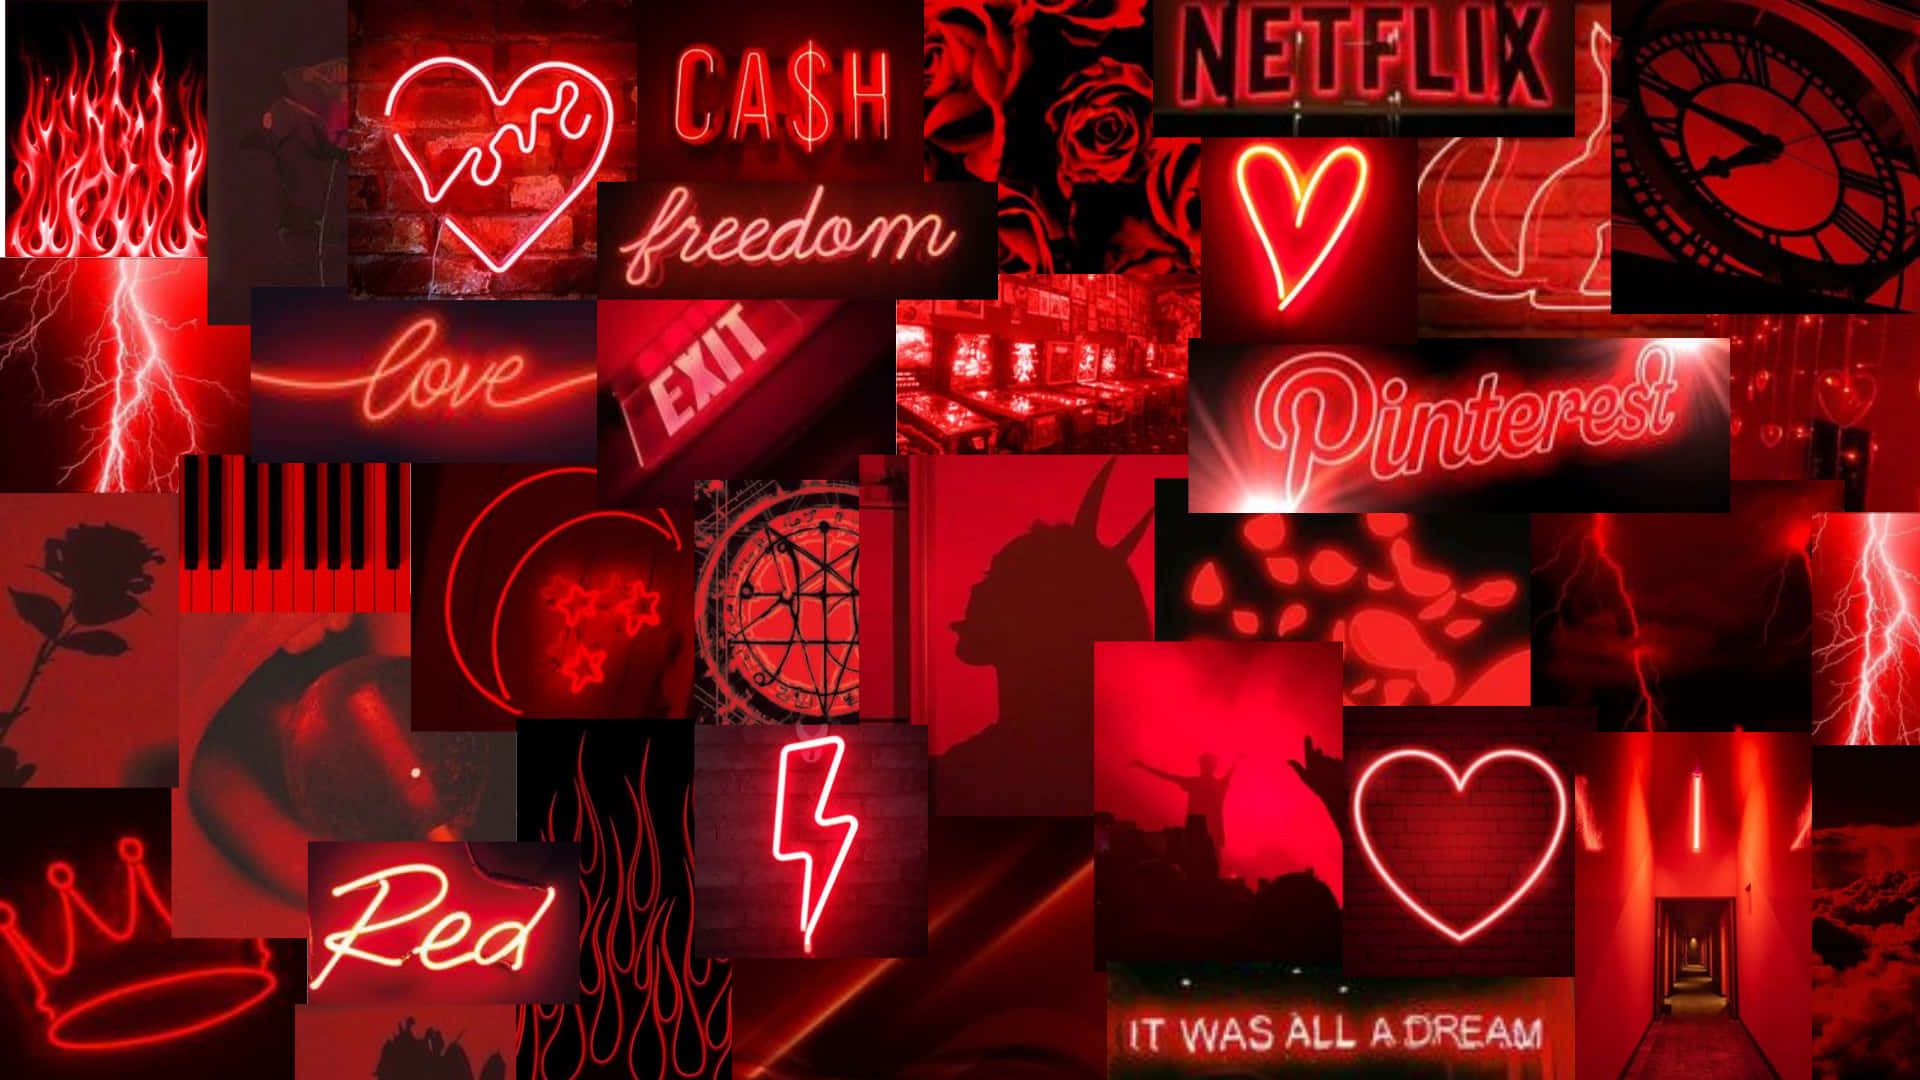 A collection of red neon lights on display - Neon, neon red, red, Netflix